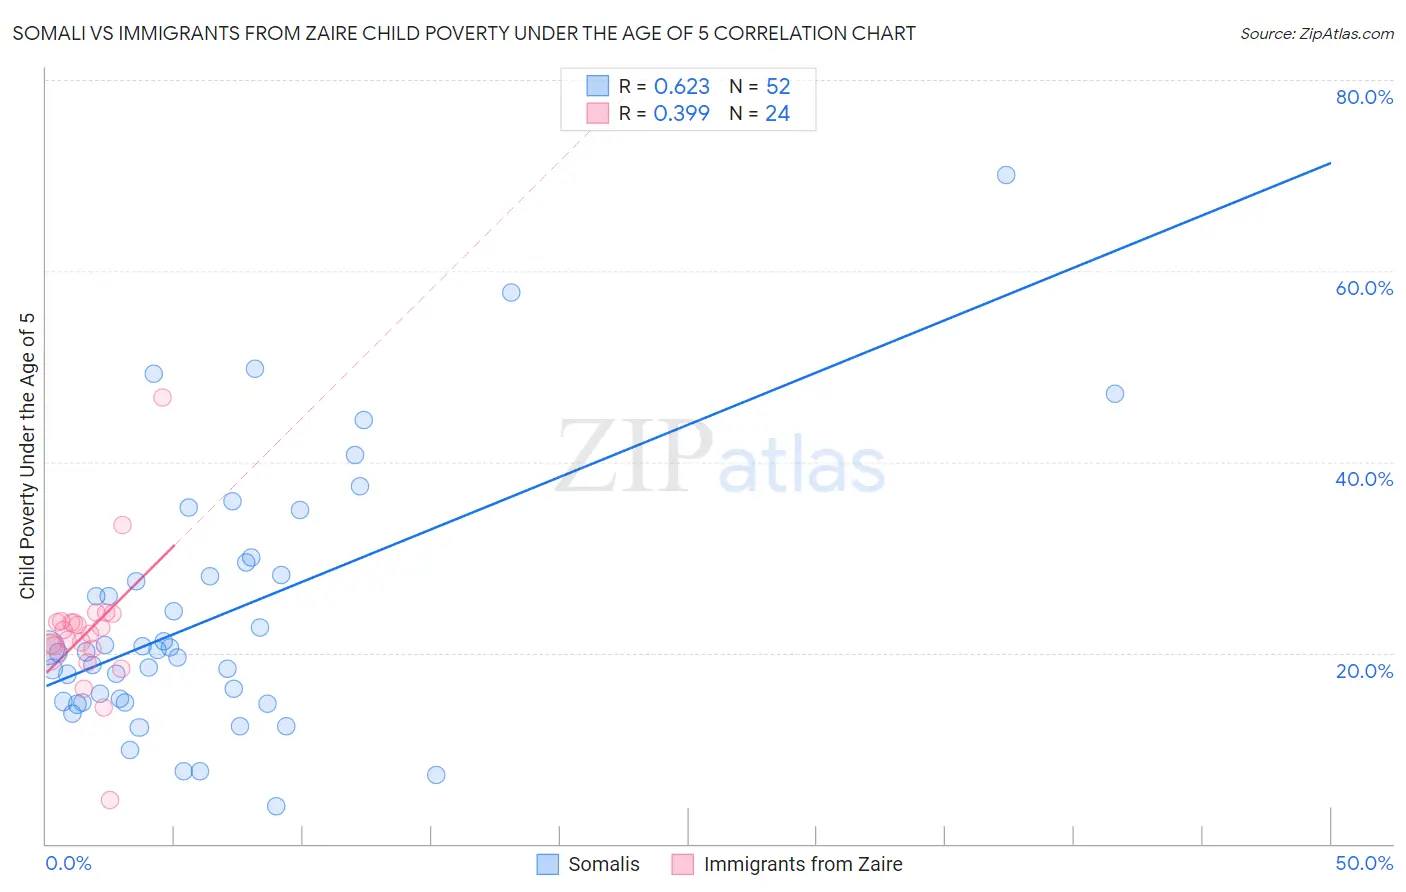 Somali vs Immigrants from Zaire Child Poverty Under the Age of 5